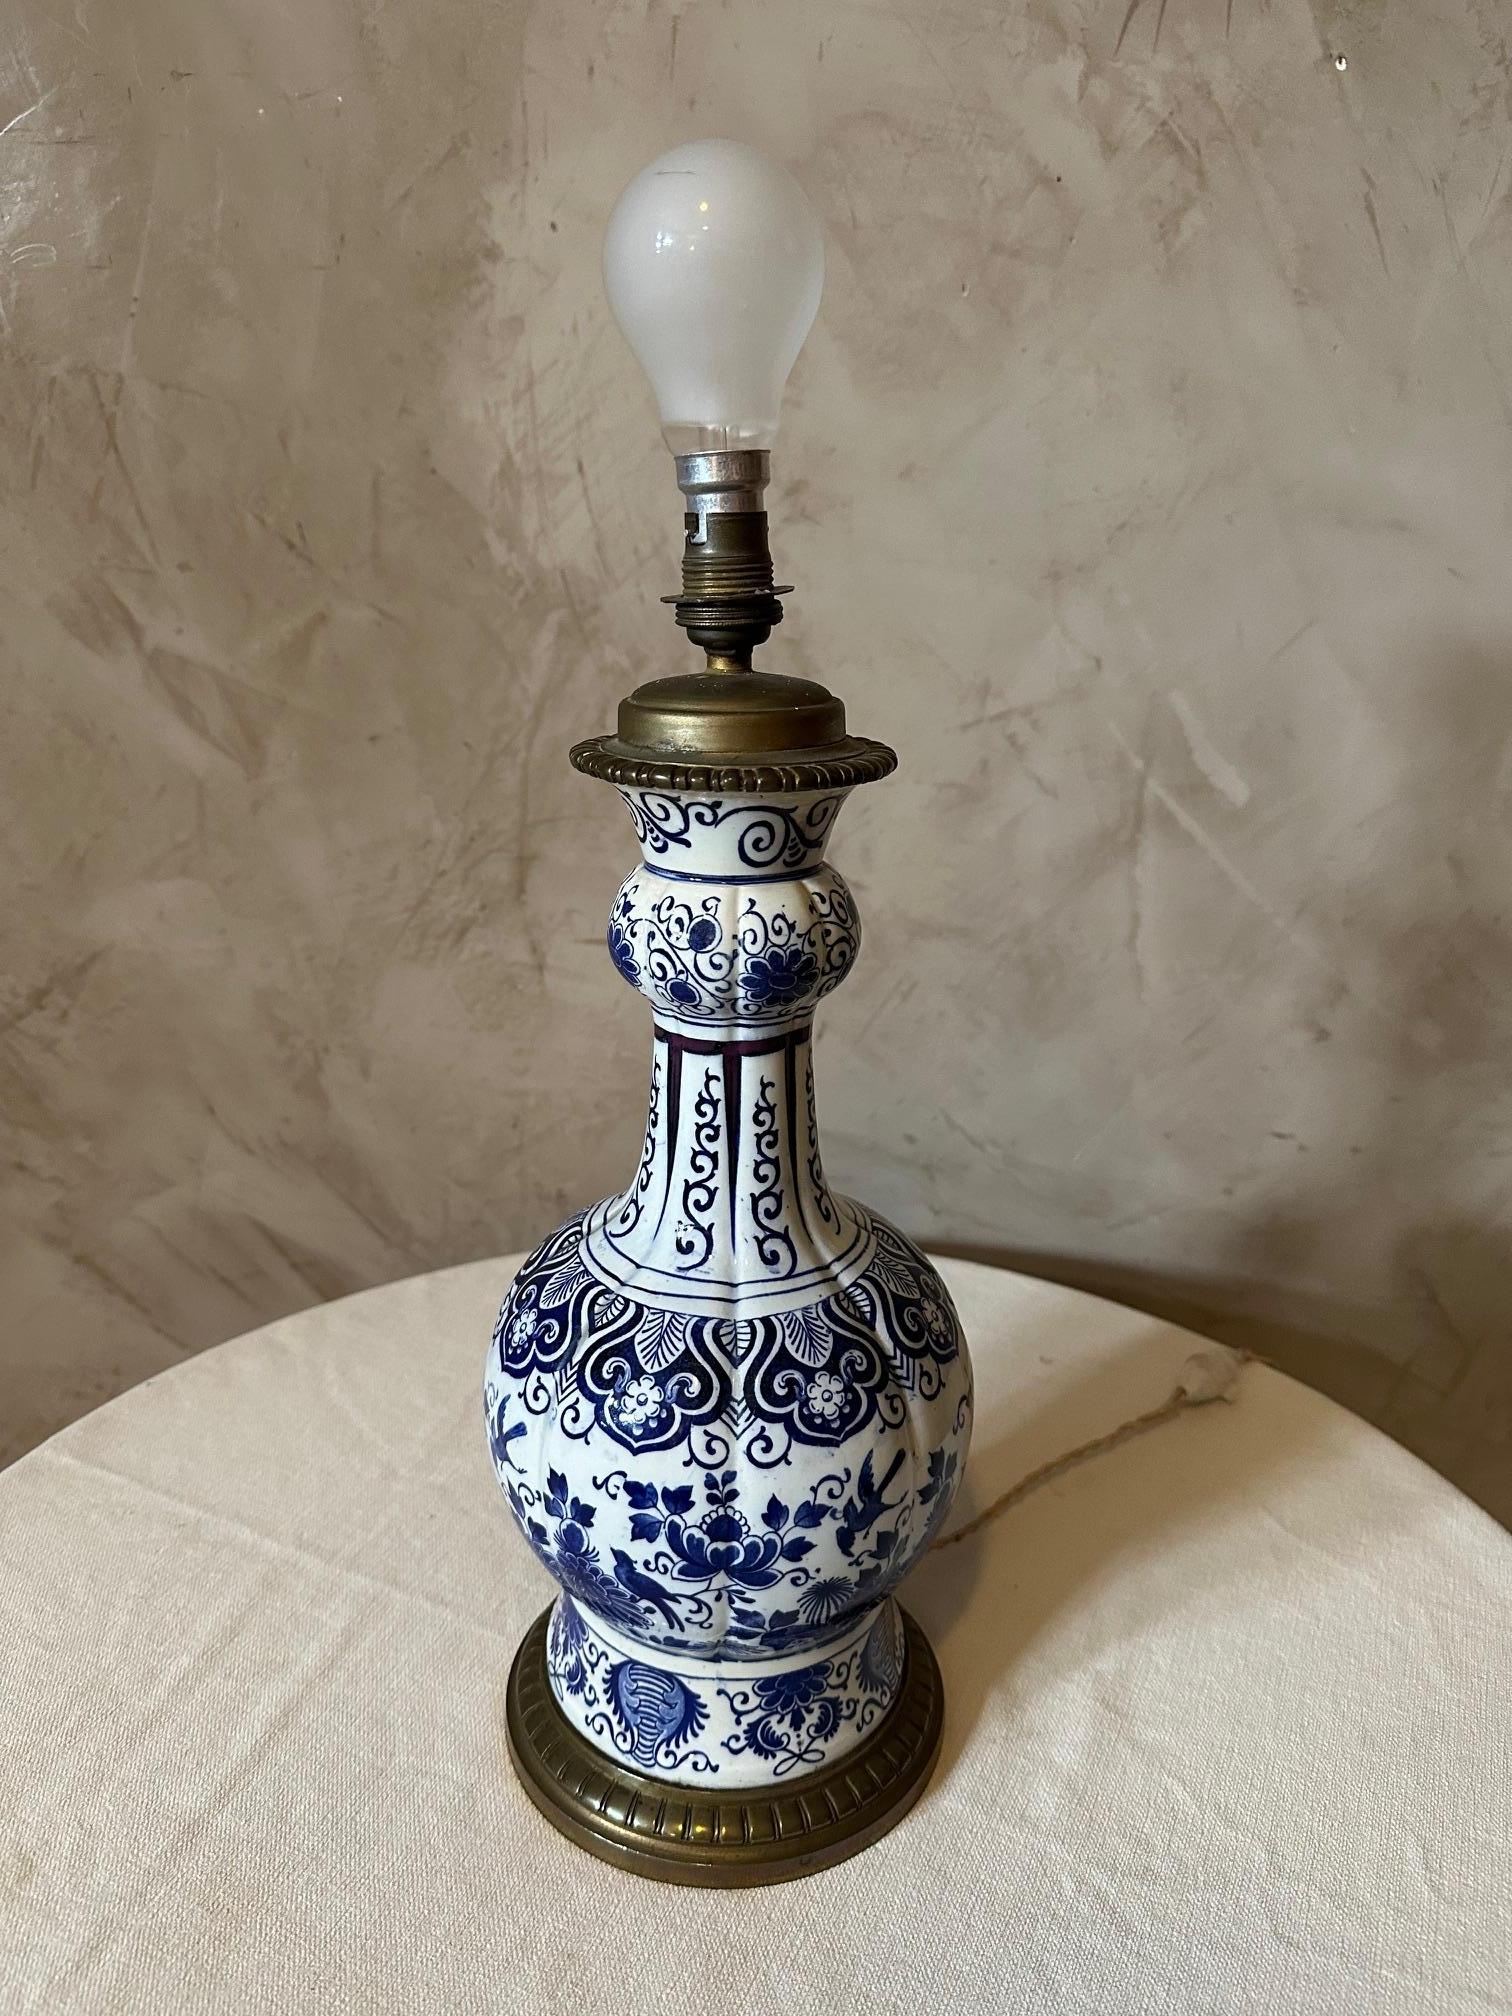 19th century French Blue and White Delft Porcelain Table Lamp For Sale 5